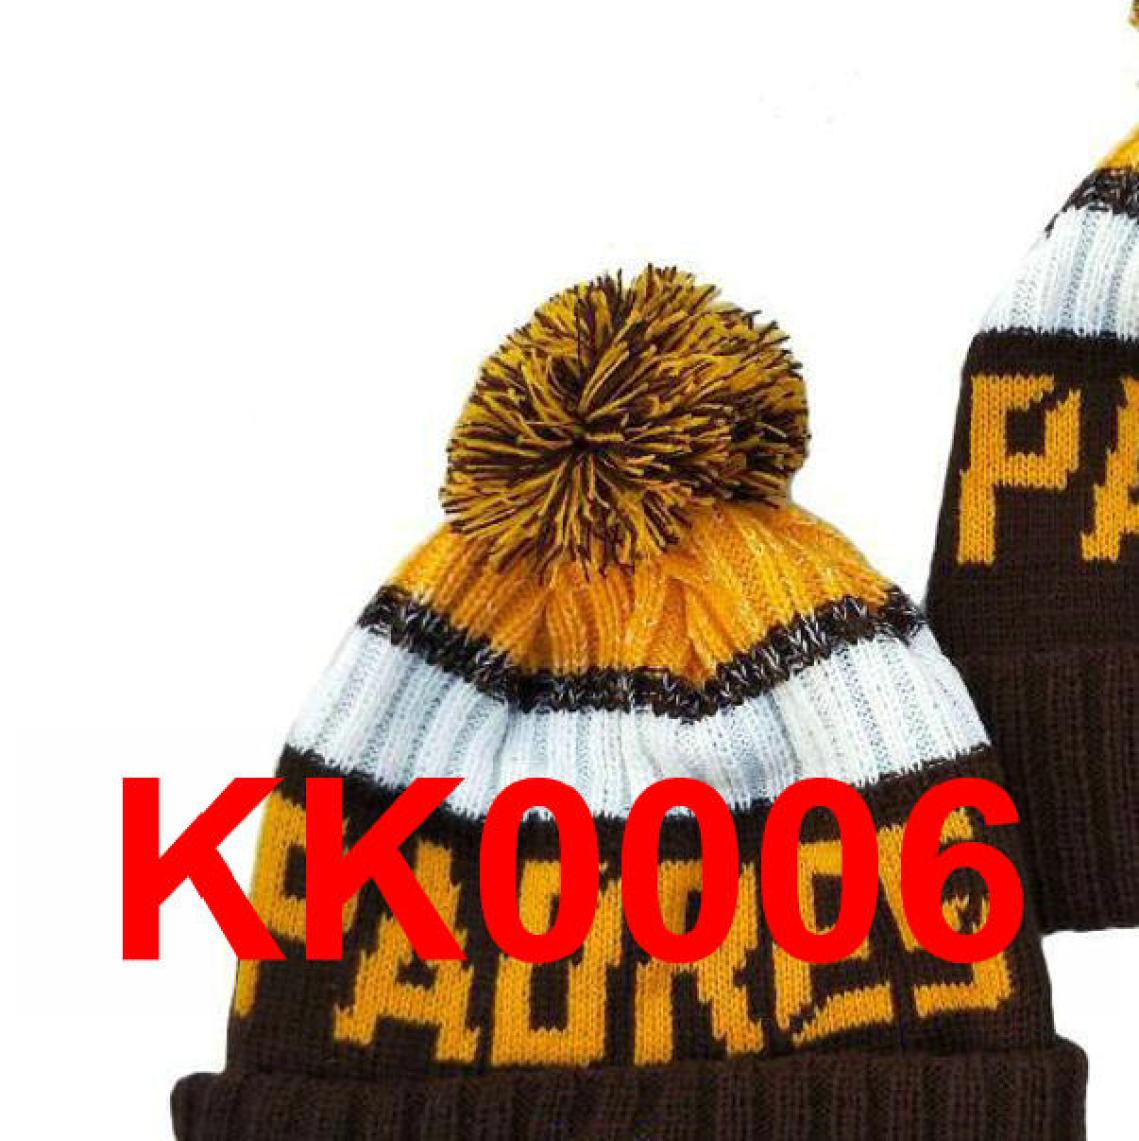 

Top Selling Padres beanie caps Hockey Sideline Cold Weather Reverse Sport Cuffed Knit Hat with Pom Winer Skull Cap a3682280, 23